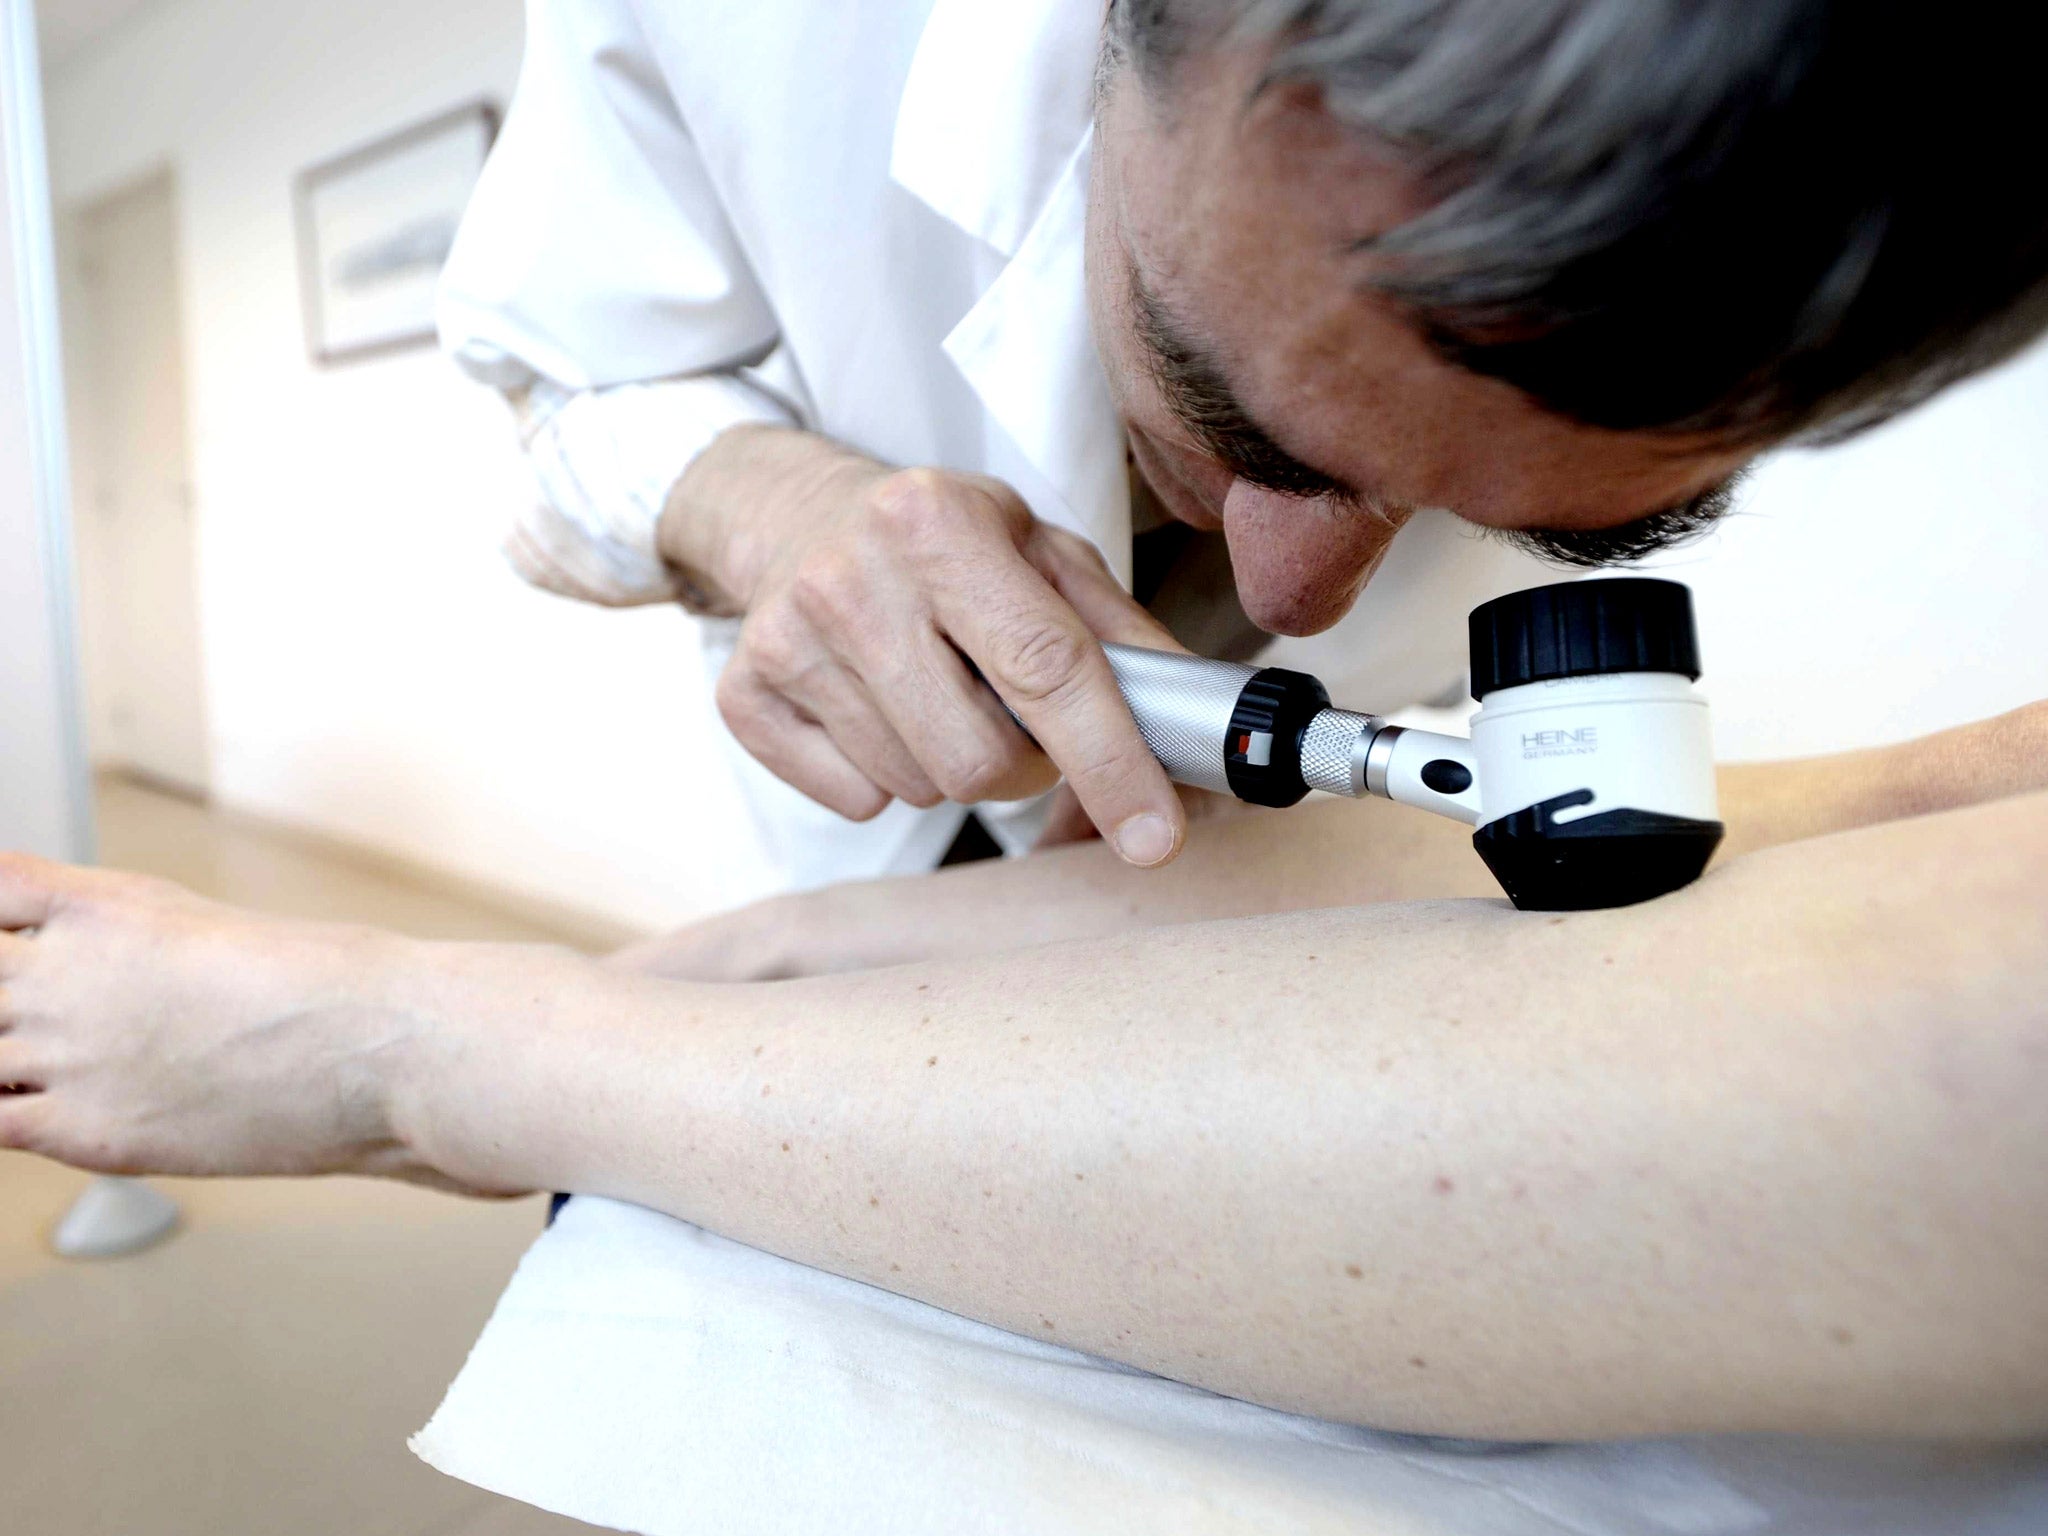 A dermatologist detecting the presence of melanoma on the skin